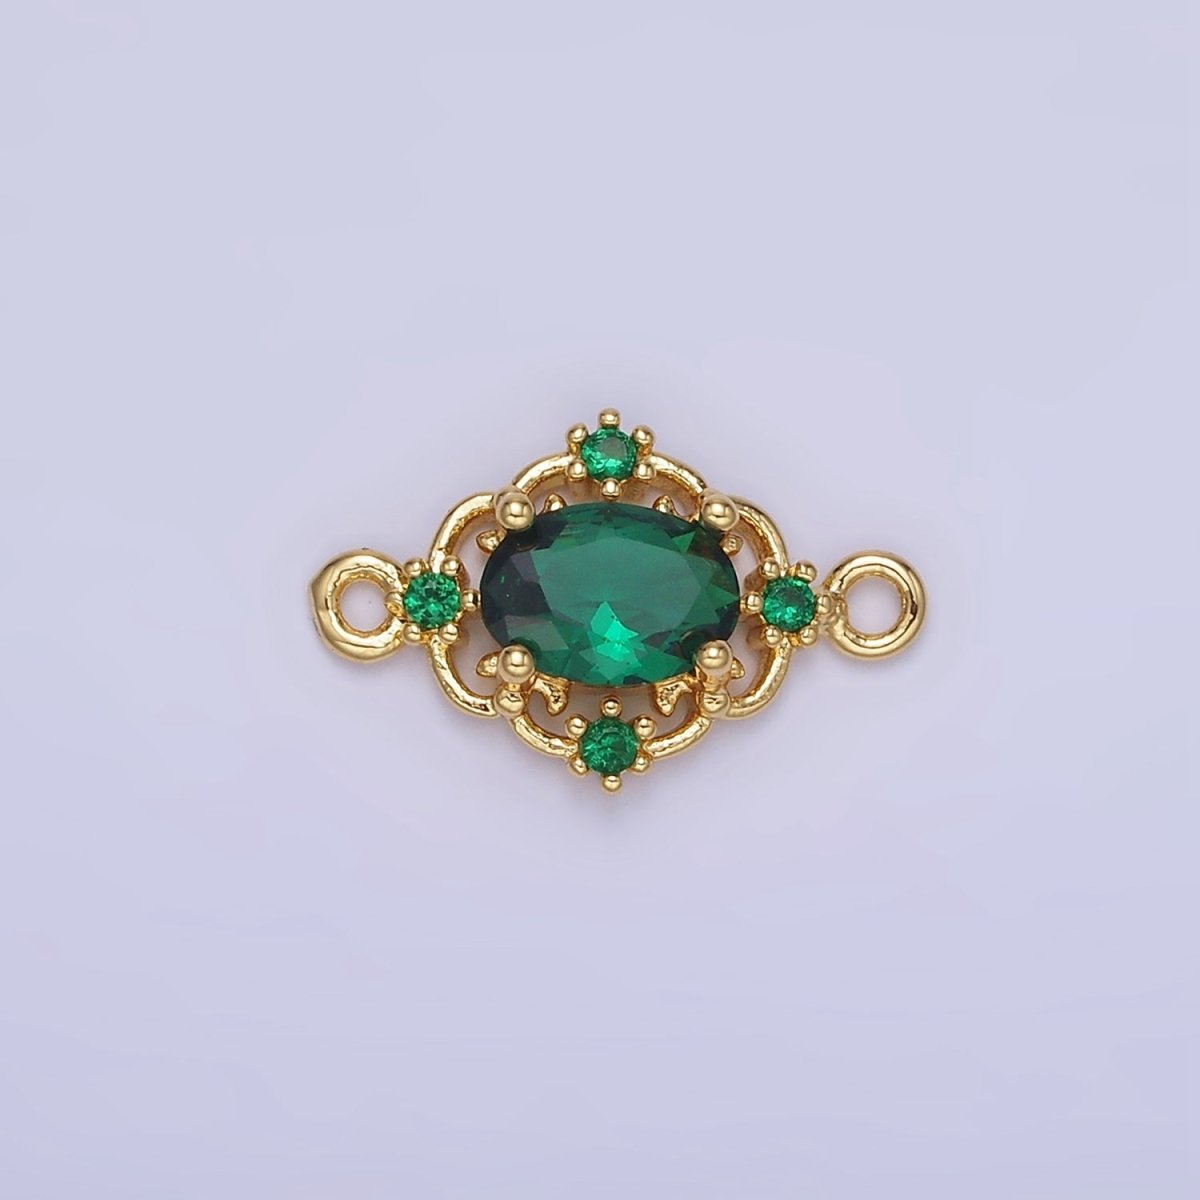 14K Gold Filled Clear, Green, Red CZ Artisan Connector | G350 - G351 - DLUXCA